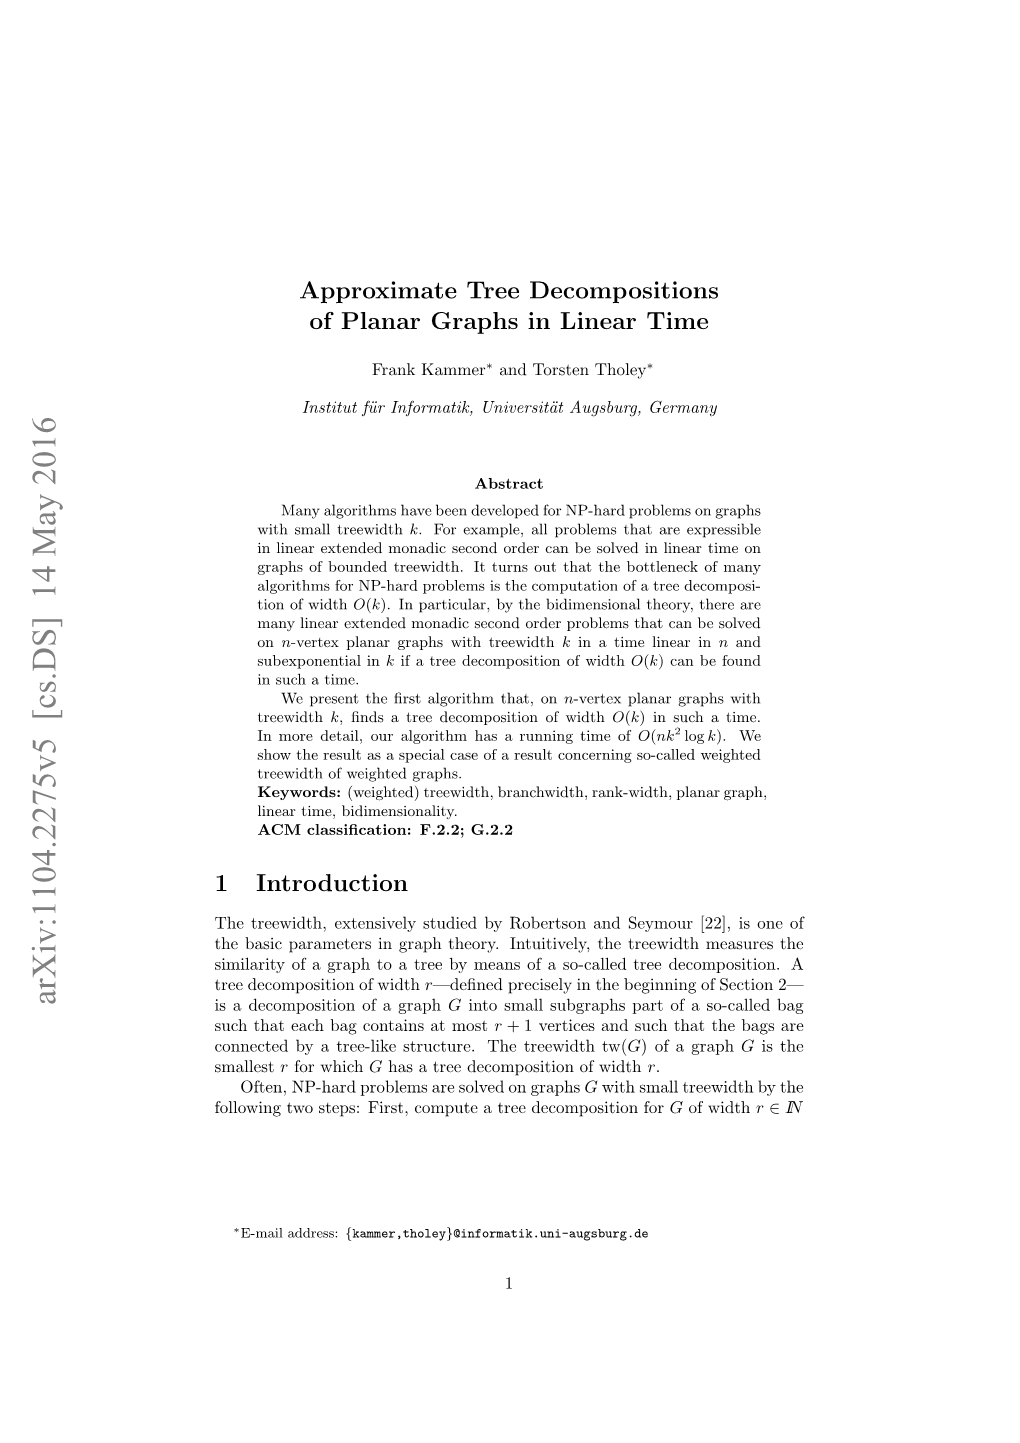 Approximate Tree Decompositions of Planar Graphs in Linear Time